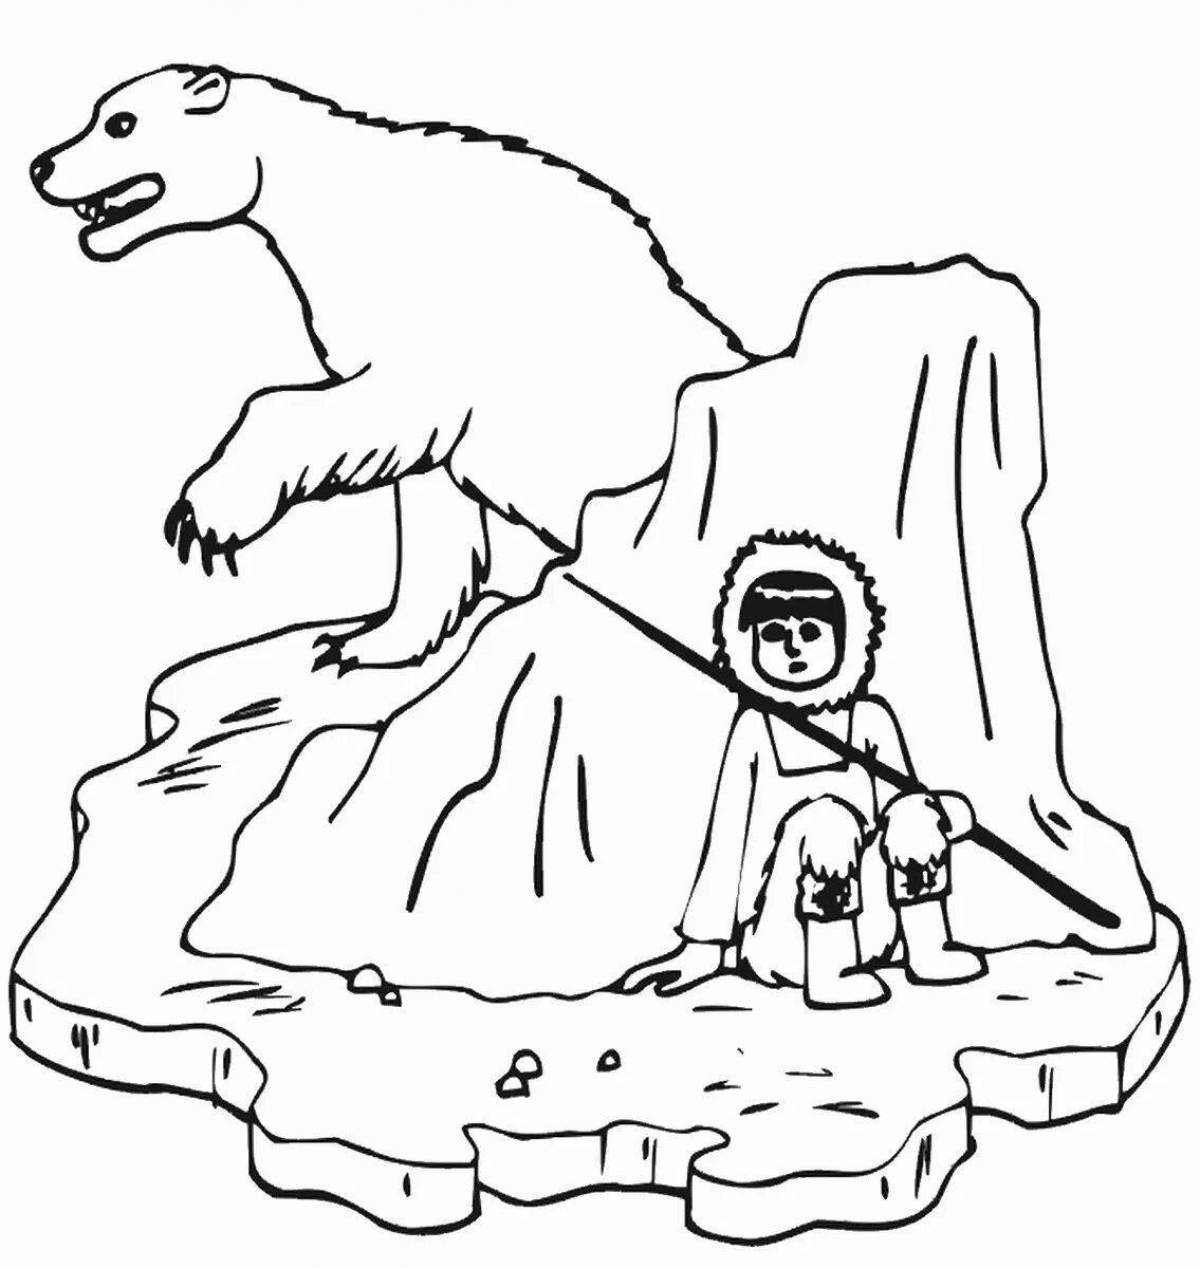 Coloring book sophisticated northern bear